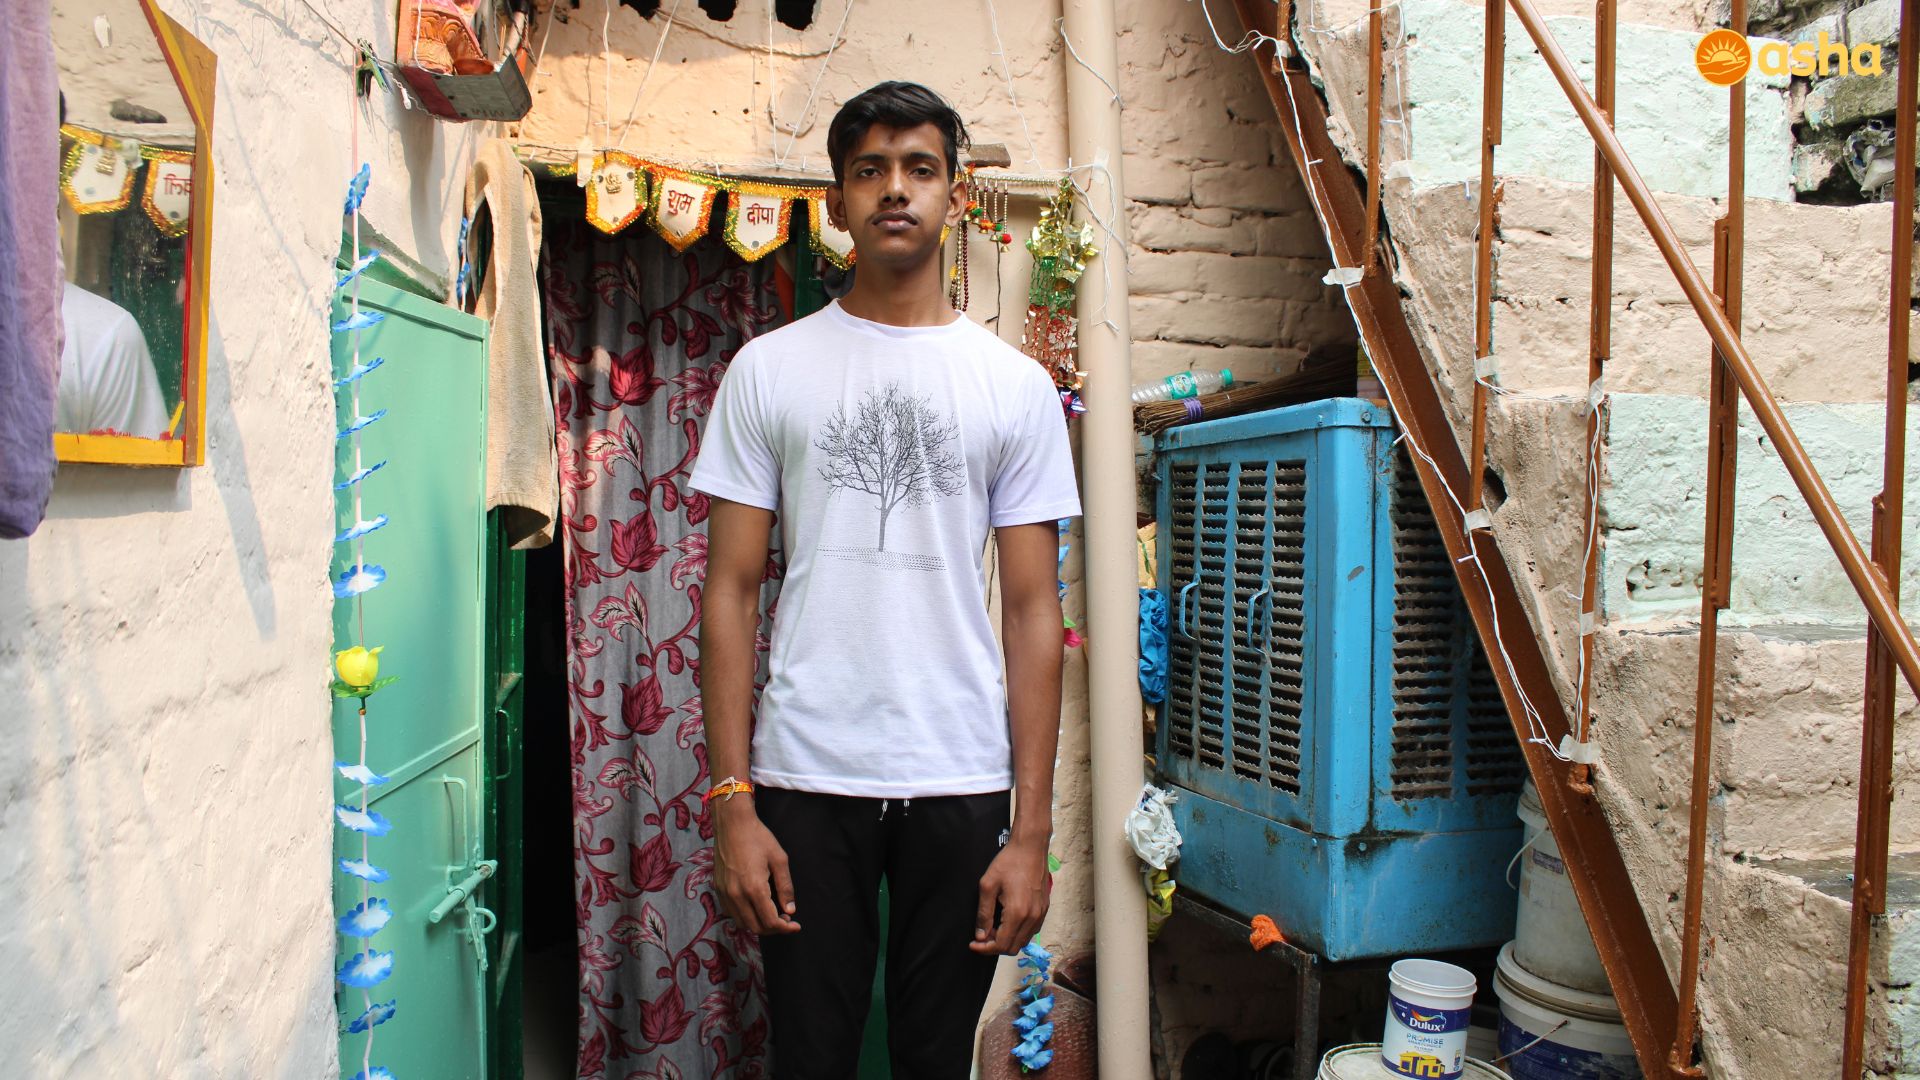 Ankur’s story is a great Example of how access to Education can change a person’s Life